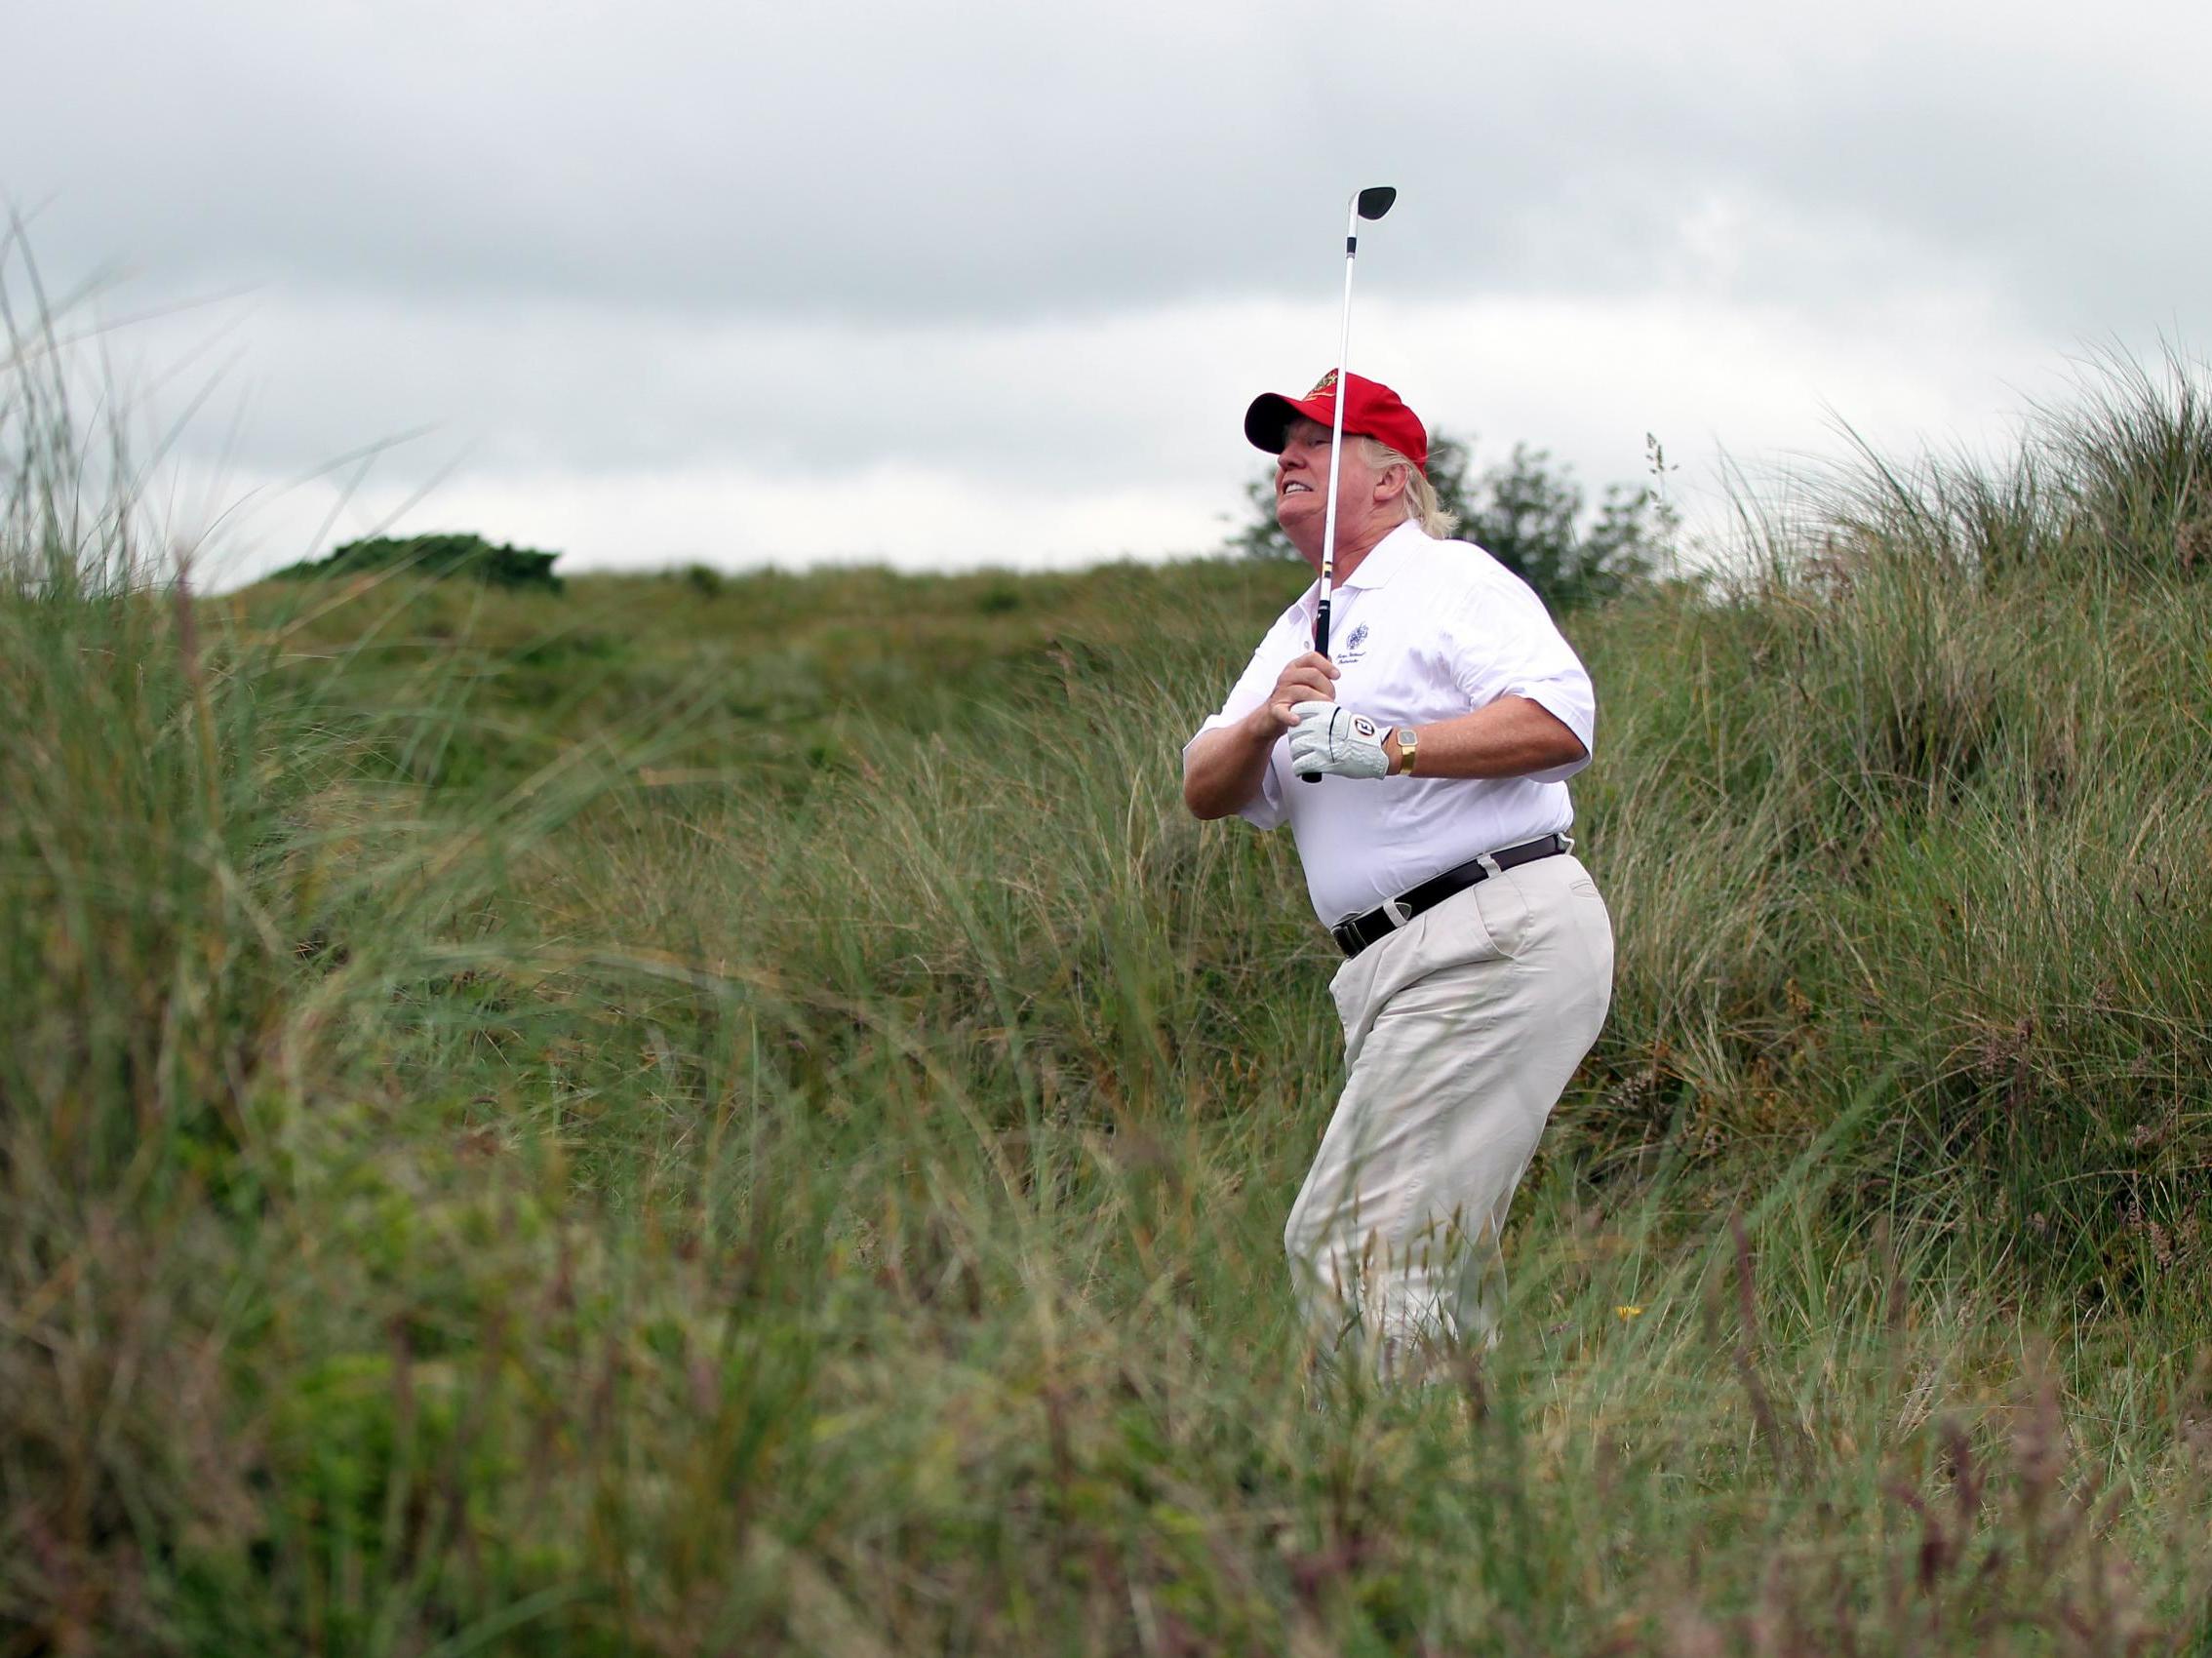 Donald Trump plays a round of golf after the opening of the Trump International Golf Links Course on 10 July, 2012, in Balmedie, Scotland